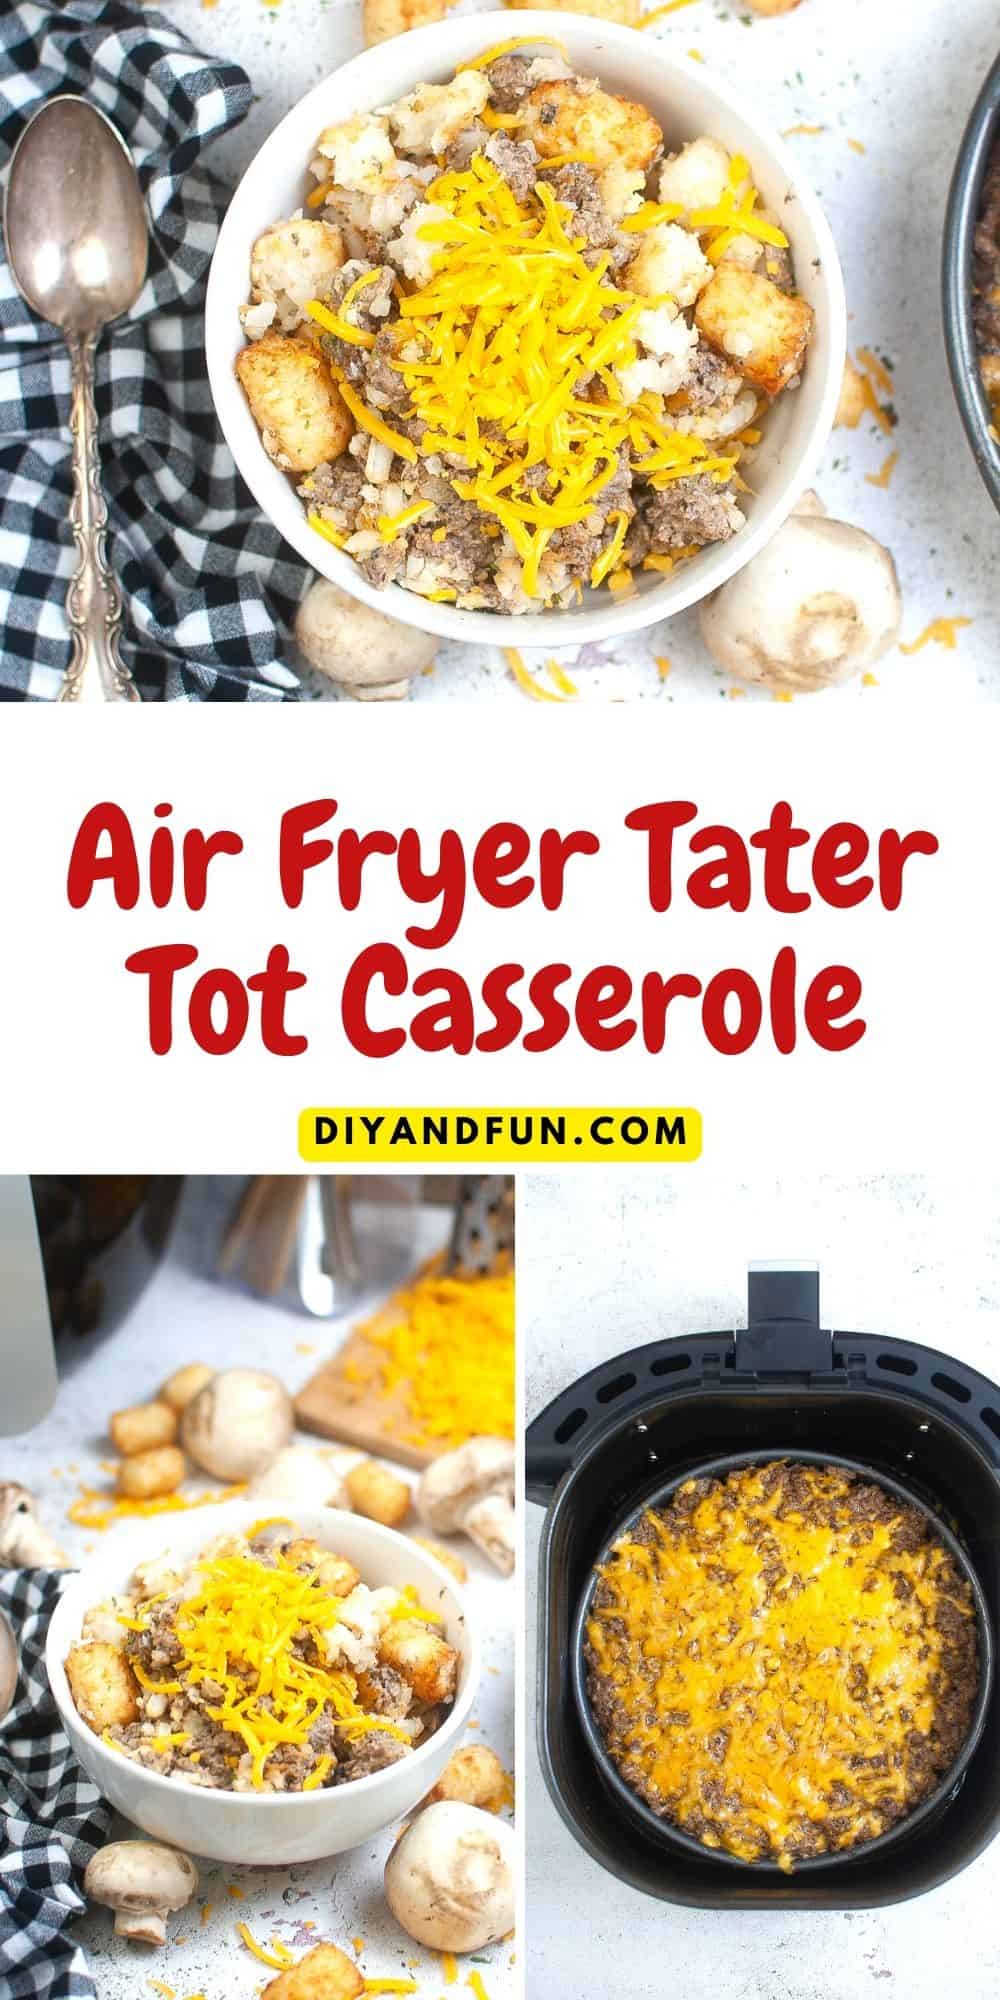 Air Fryer Tater Tot Casserole, a simple and delicious comfort food meal or appetizer recipe made in an air fryer.